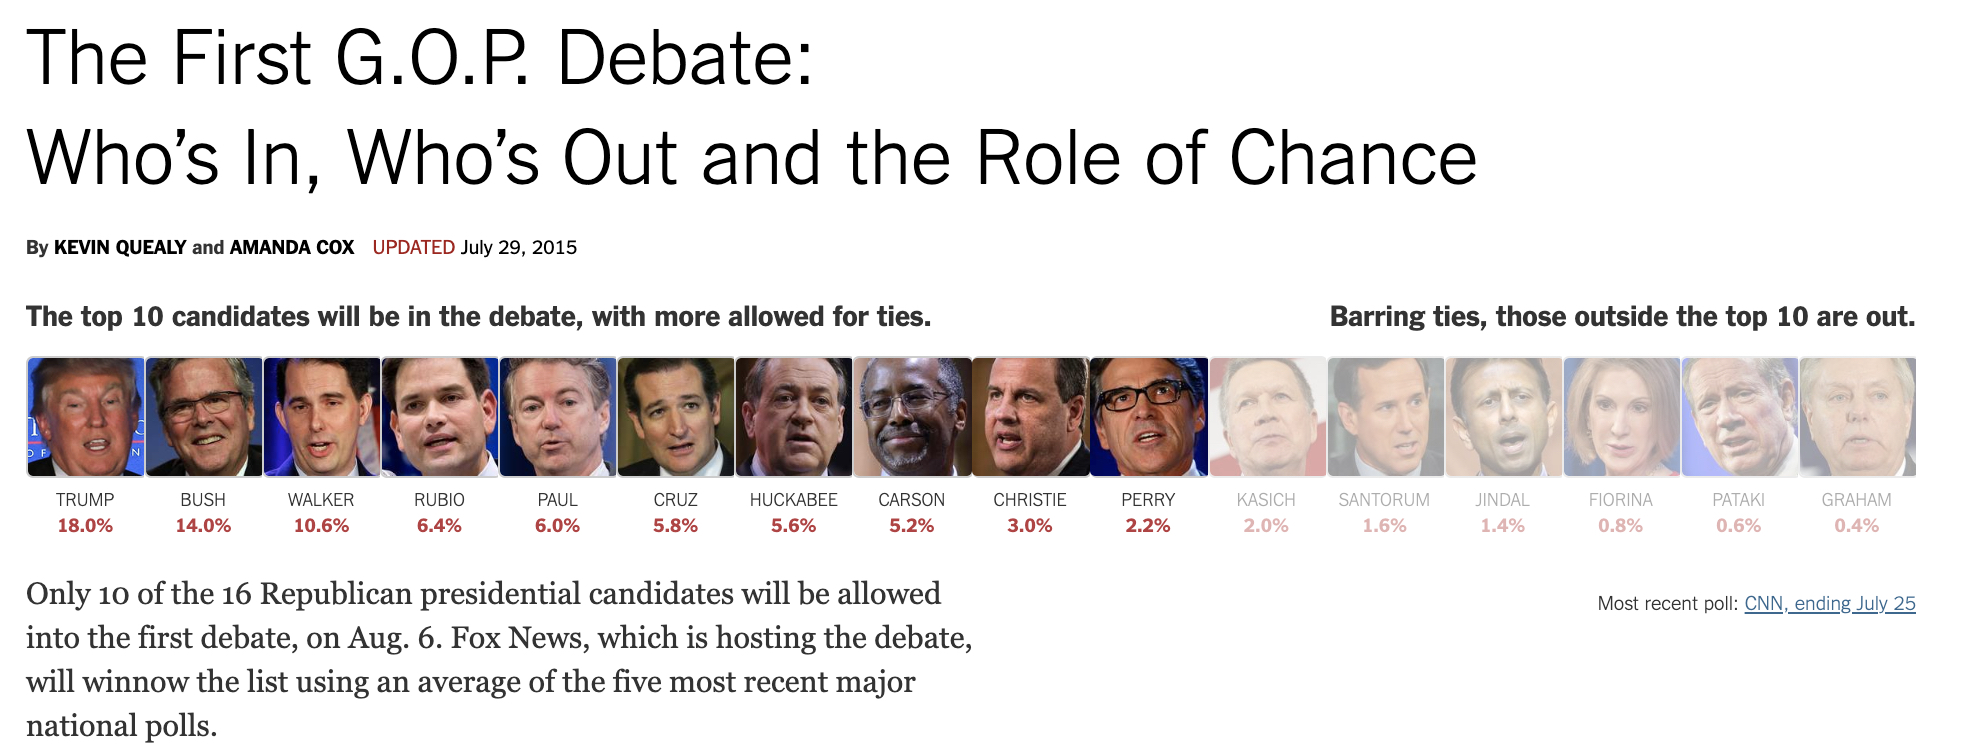 For the 2016 election the Republican primary debates allowed only the top 10 candidates, ranked by national polls [NYT](https://www.nytimes.com/interactive/2015/07/21/upshot/election-2015-the-first-gop-debate-and-the-role-of-chance.html?_r=0)